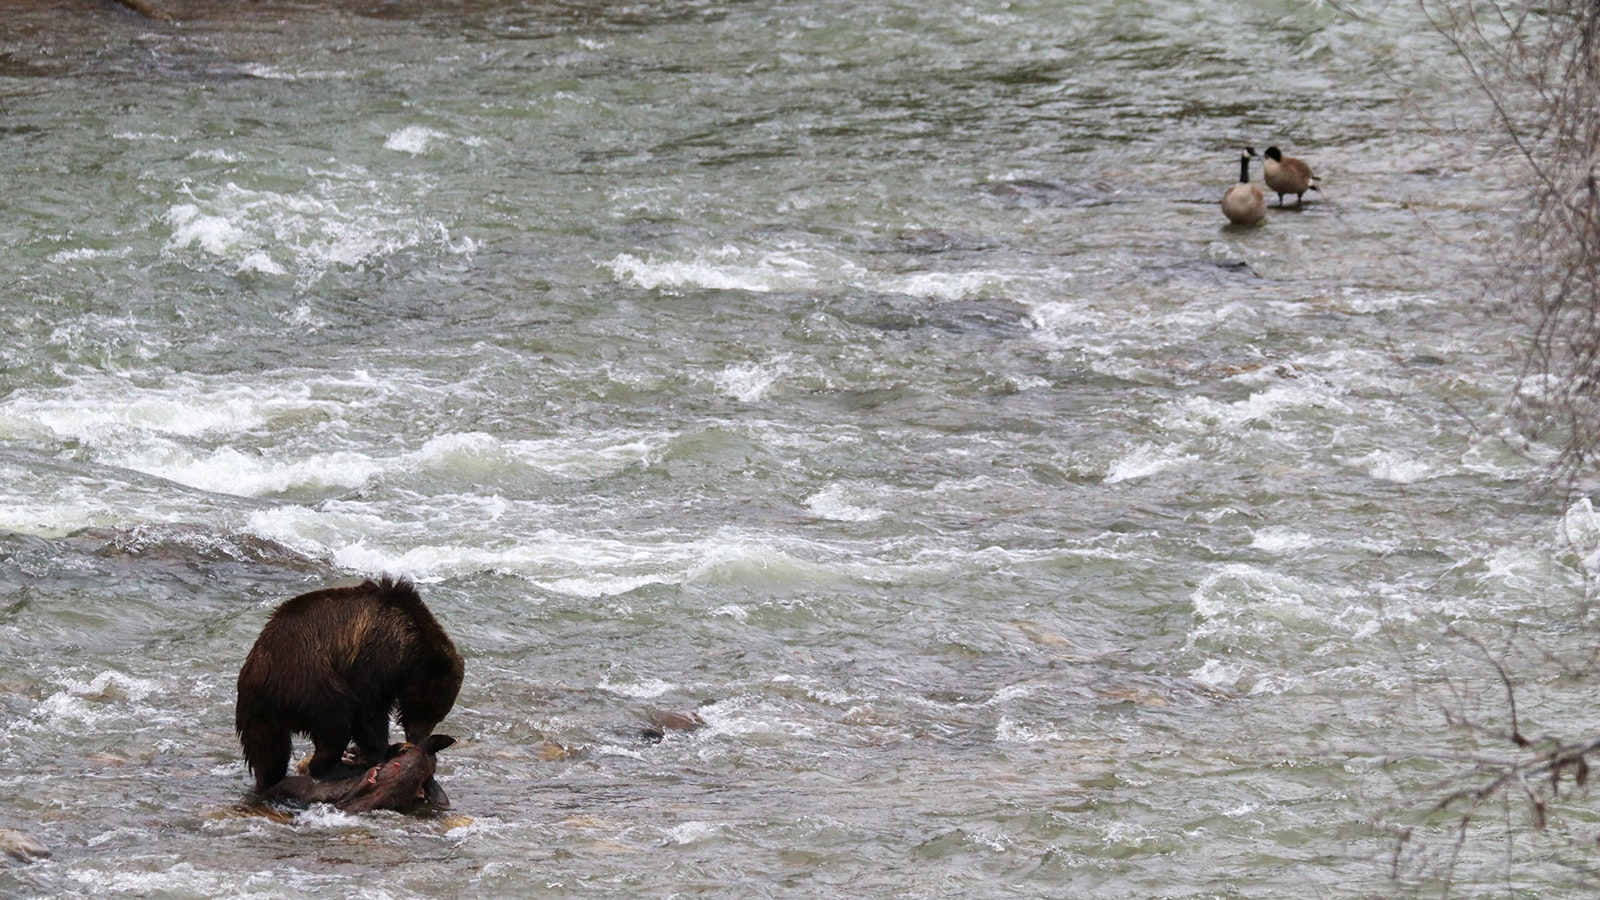 A young male grizzly gorges himself on a big game carcass he found in the middle of the Hoback River. Fortunately for him, no other grizzlies showed up to try stealing it.